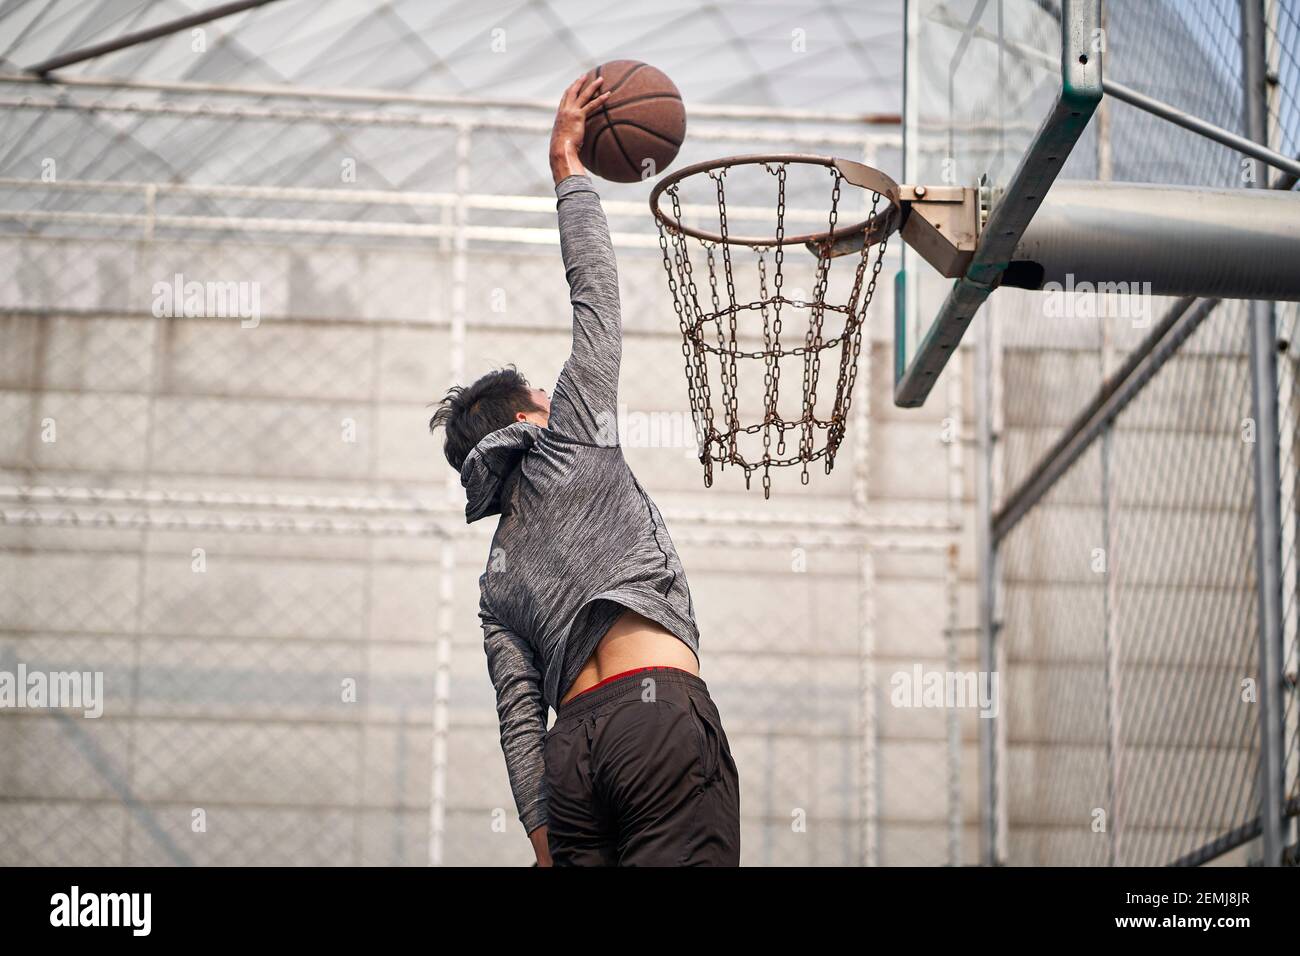 young asian adult man basketball player attempting a dunk on outdoor court Stock Photo